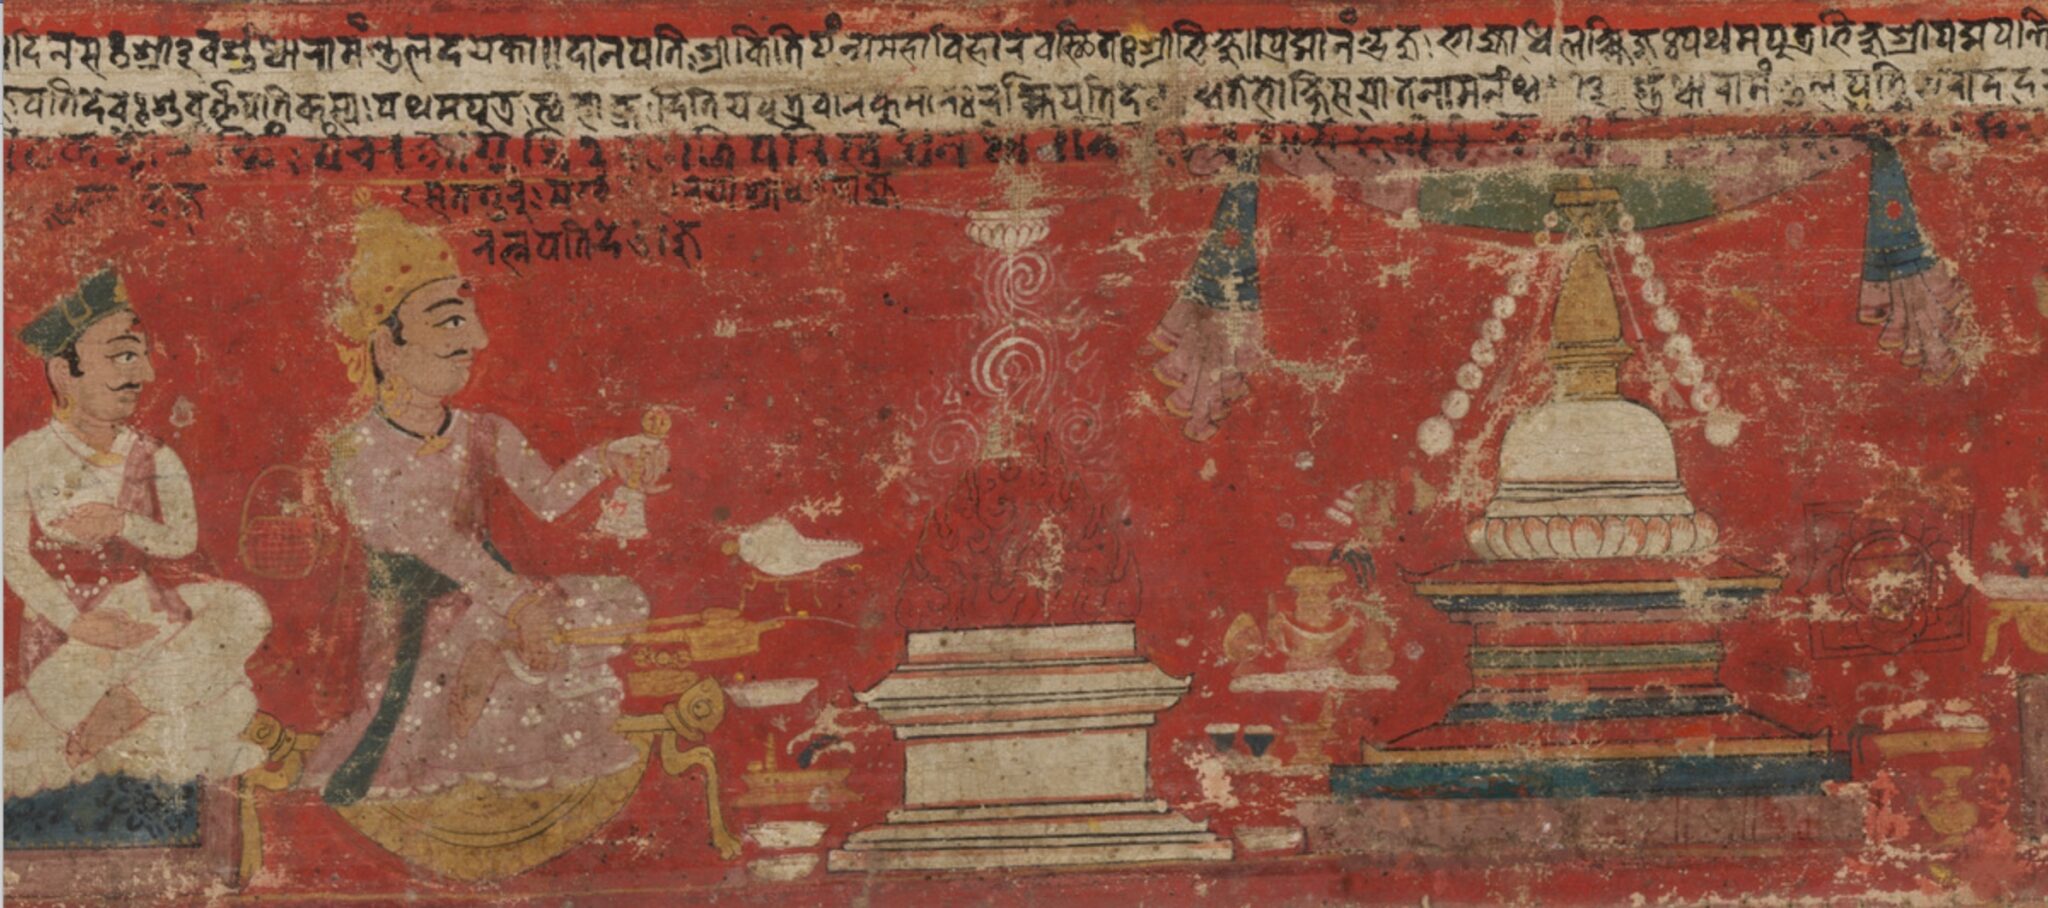 Two men kneel facing altar and stupa against red background with lines of text above scene